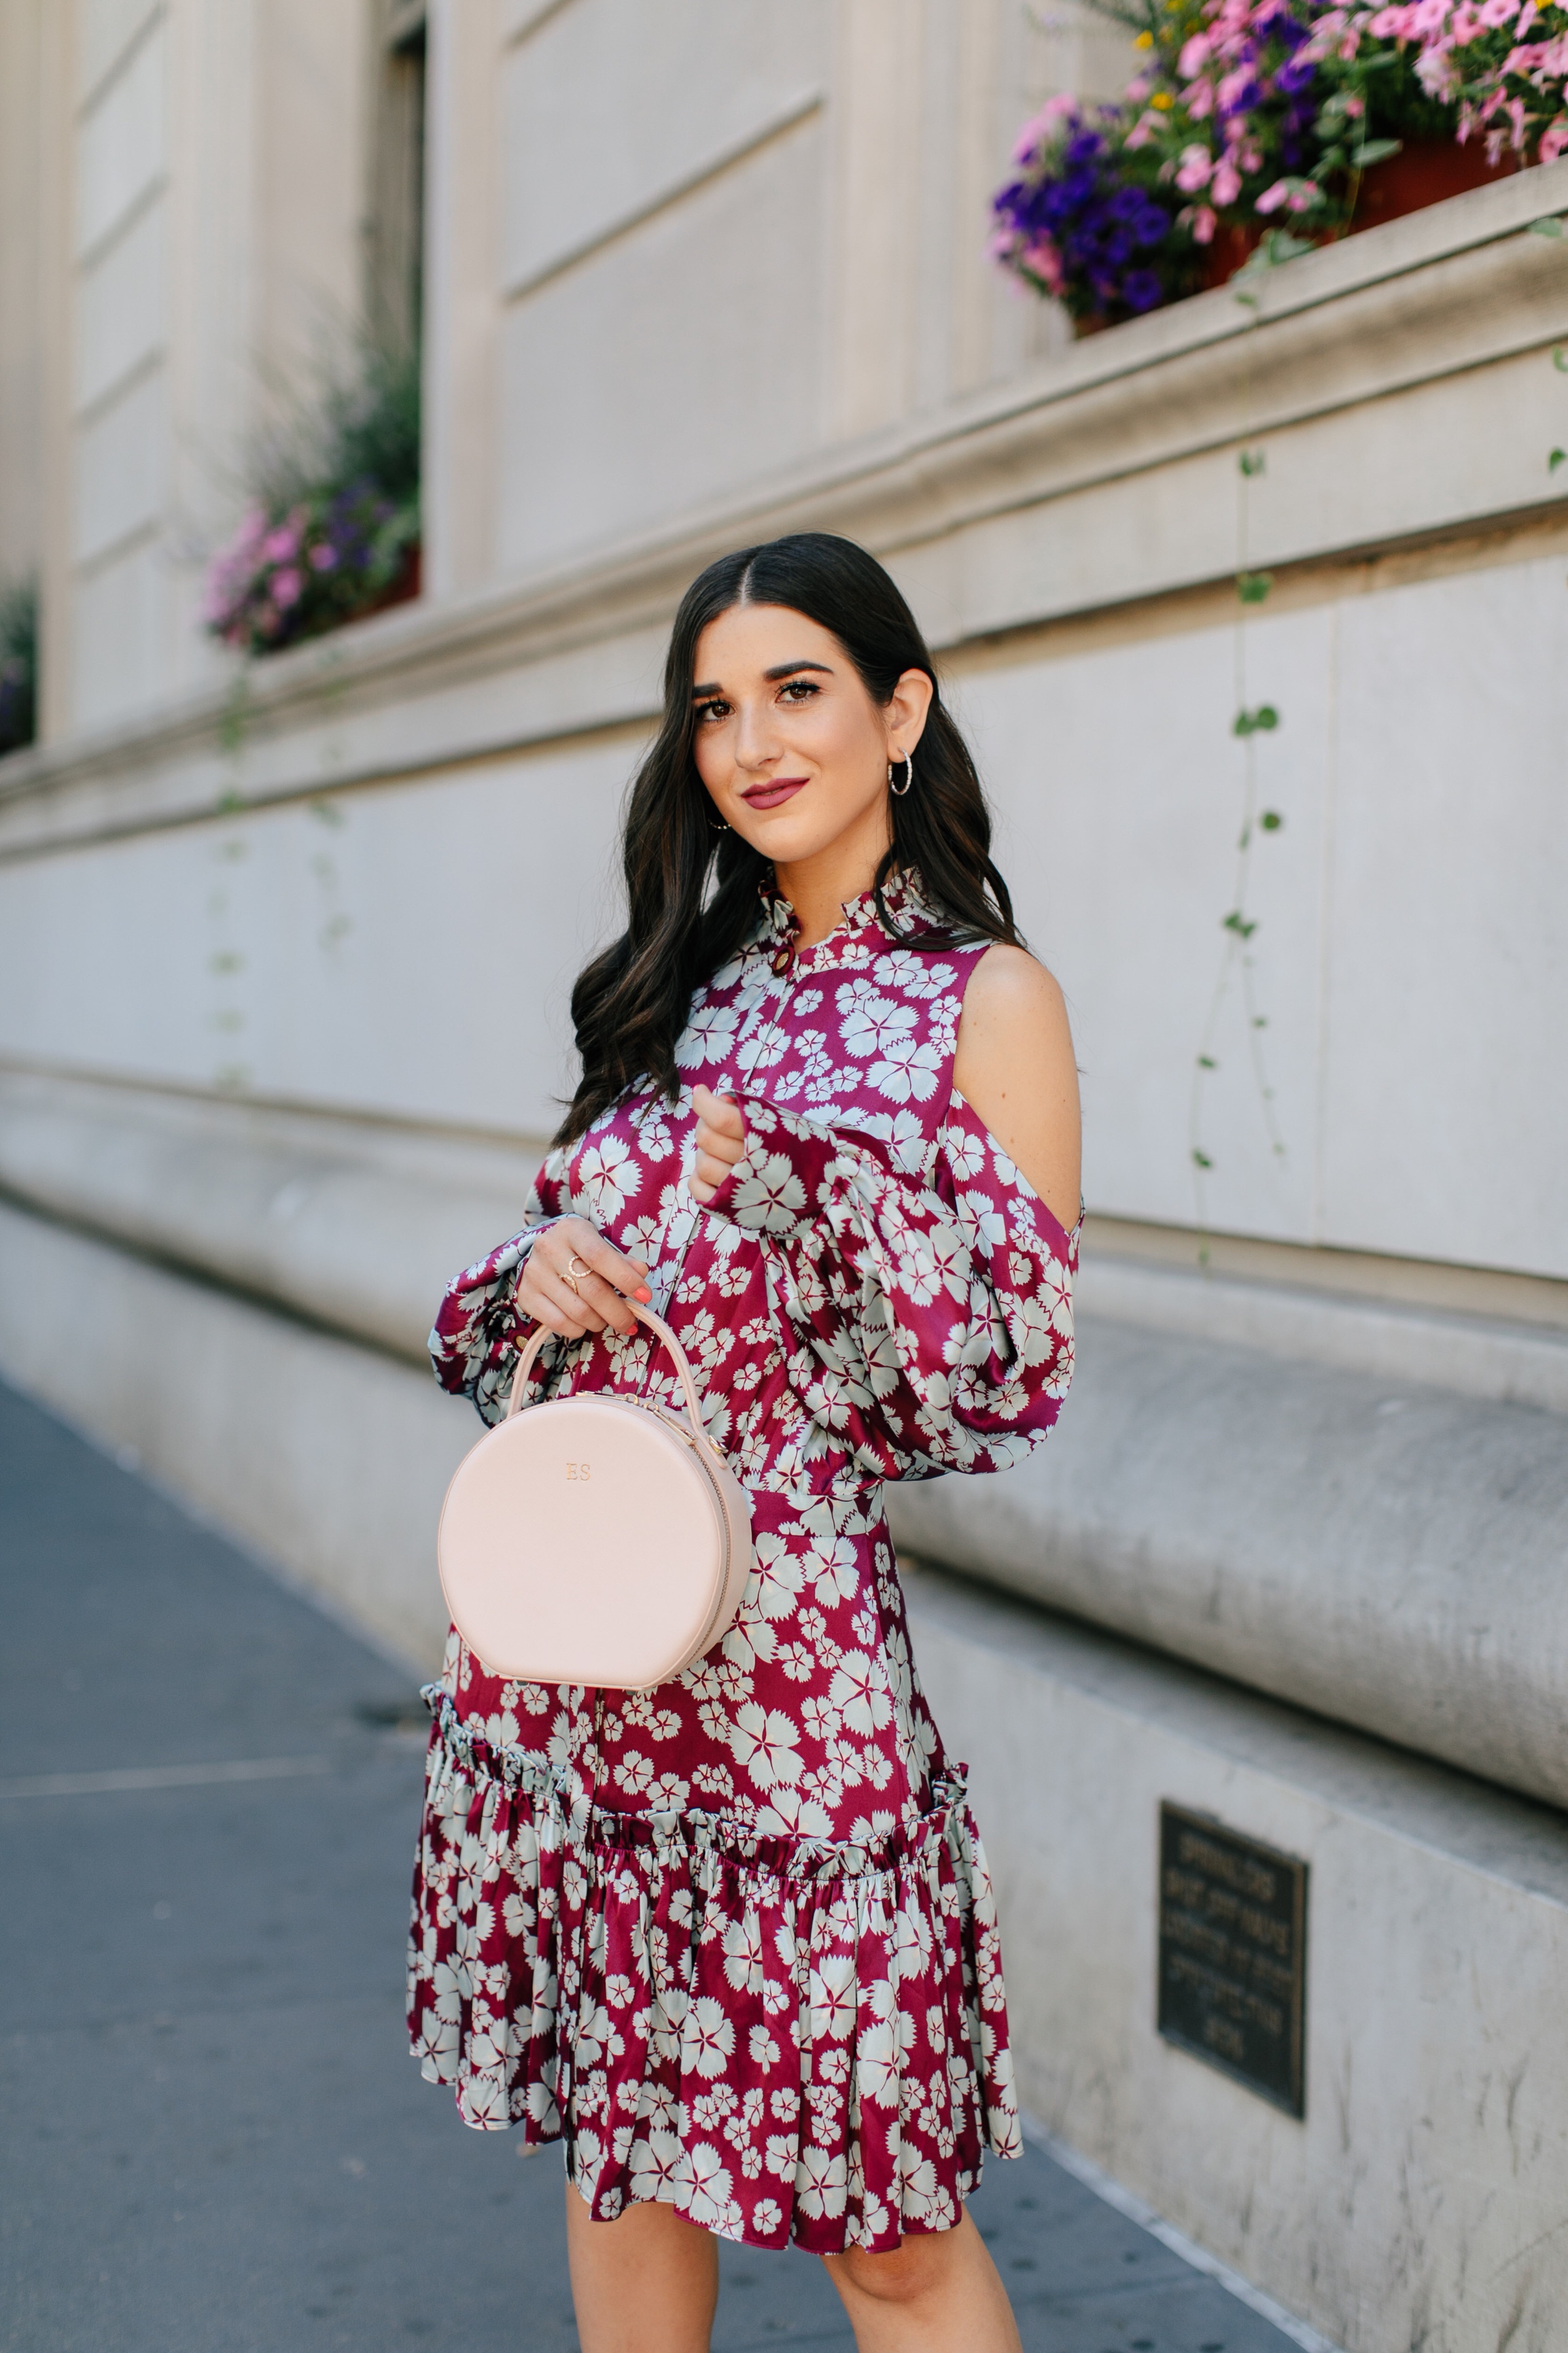 A Blogger’s Guide To Turning Your S.O. Into Your Photographer Cold Shoulder Floral Dress Esther Santer Fashion Blog NYC Street Style Blogger Outfit OOTD Trendy Designer Nordstrom Strappy  Blush Pink Heels Circle Bag Shopping Wavy Hair Diamond Jewelry.jpg